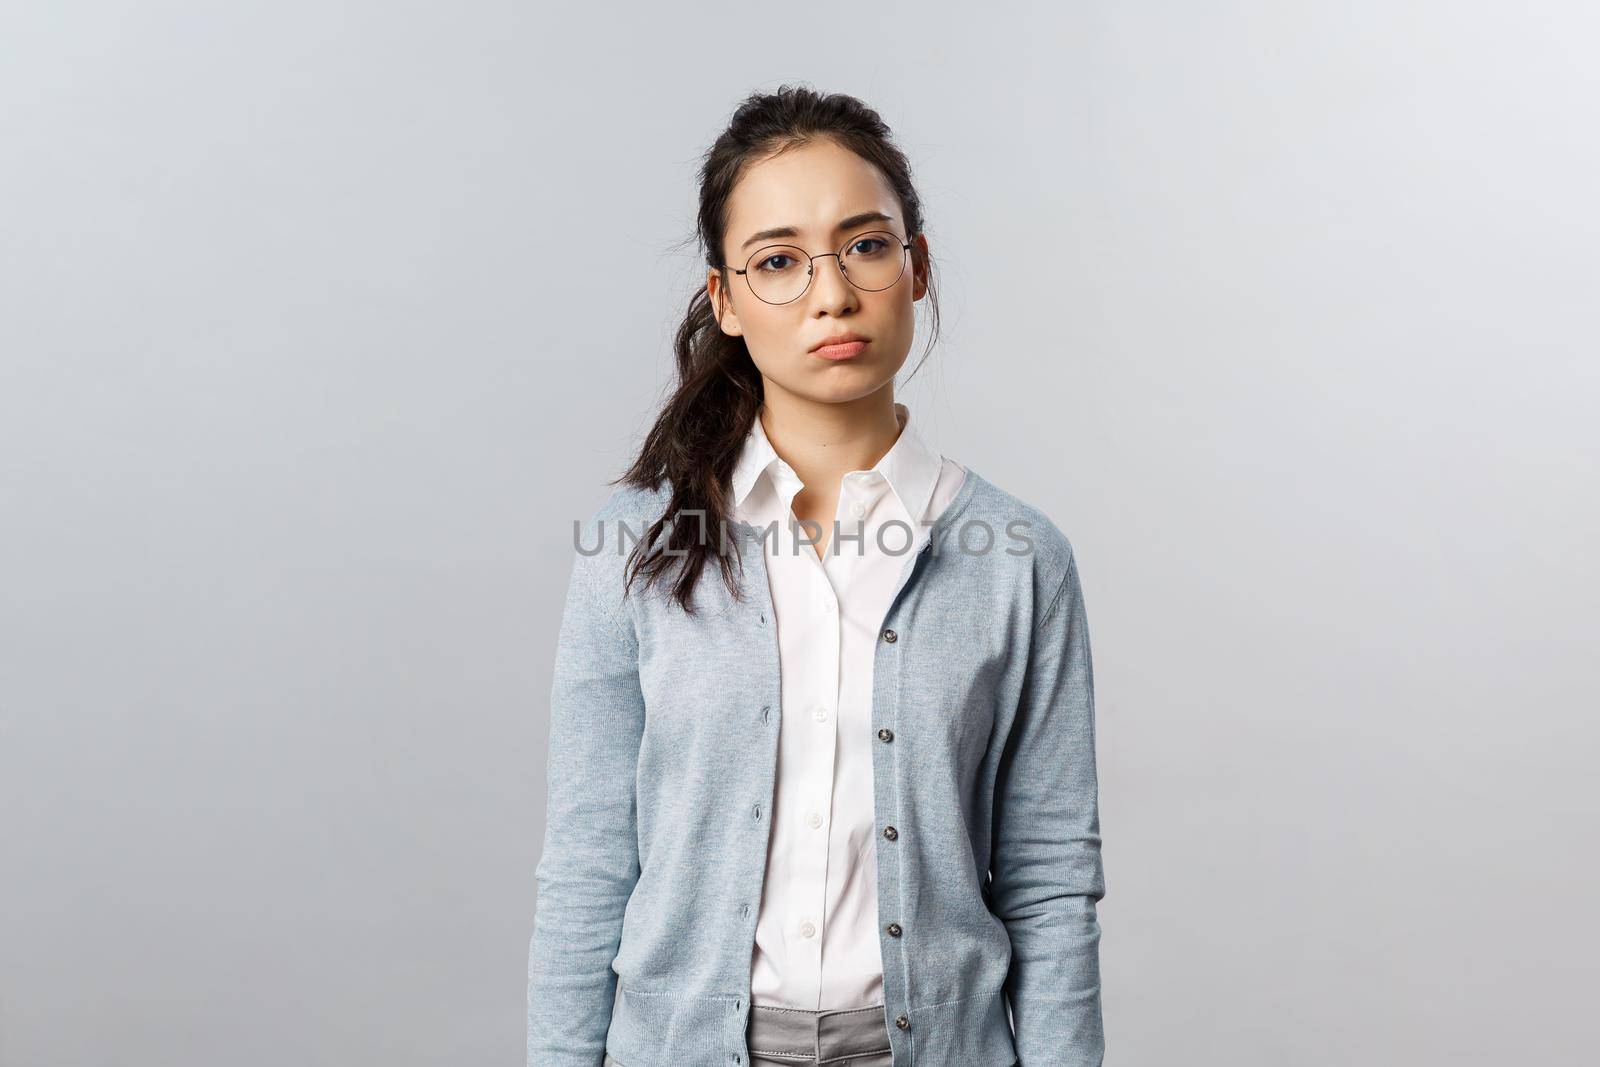 Gloomy and indifferent, lonely asian woman in glasses, feel uneasy and tired look camera drained, feel overworking and displeased, sighing with regret, standing upset over grey background.